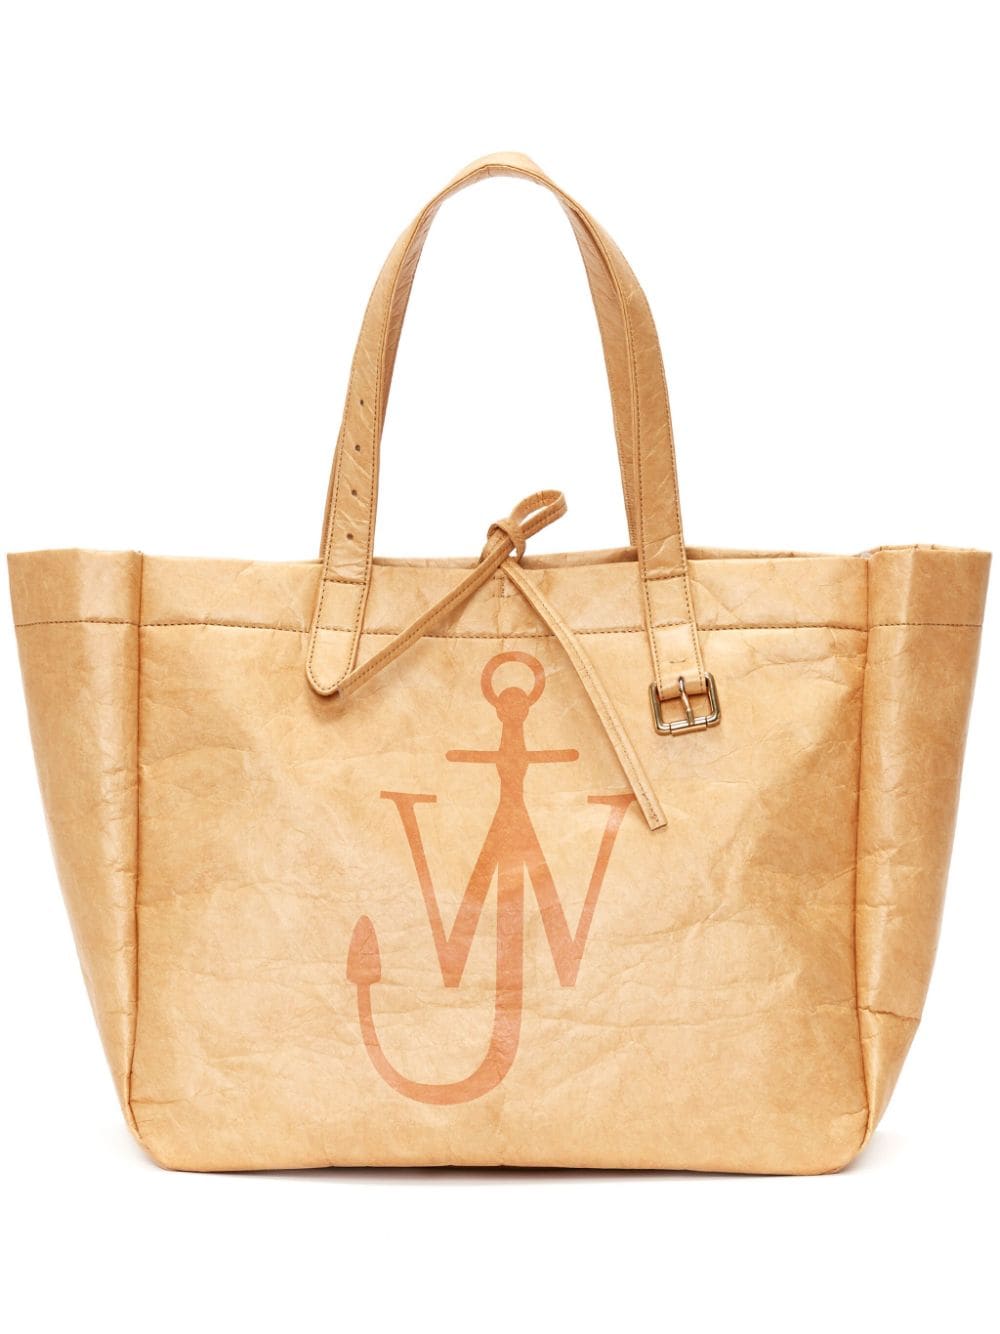 JW Anderson logo-print faux-leather tote bag - Neutrals